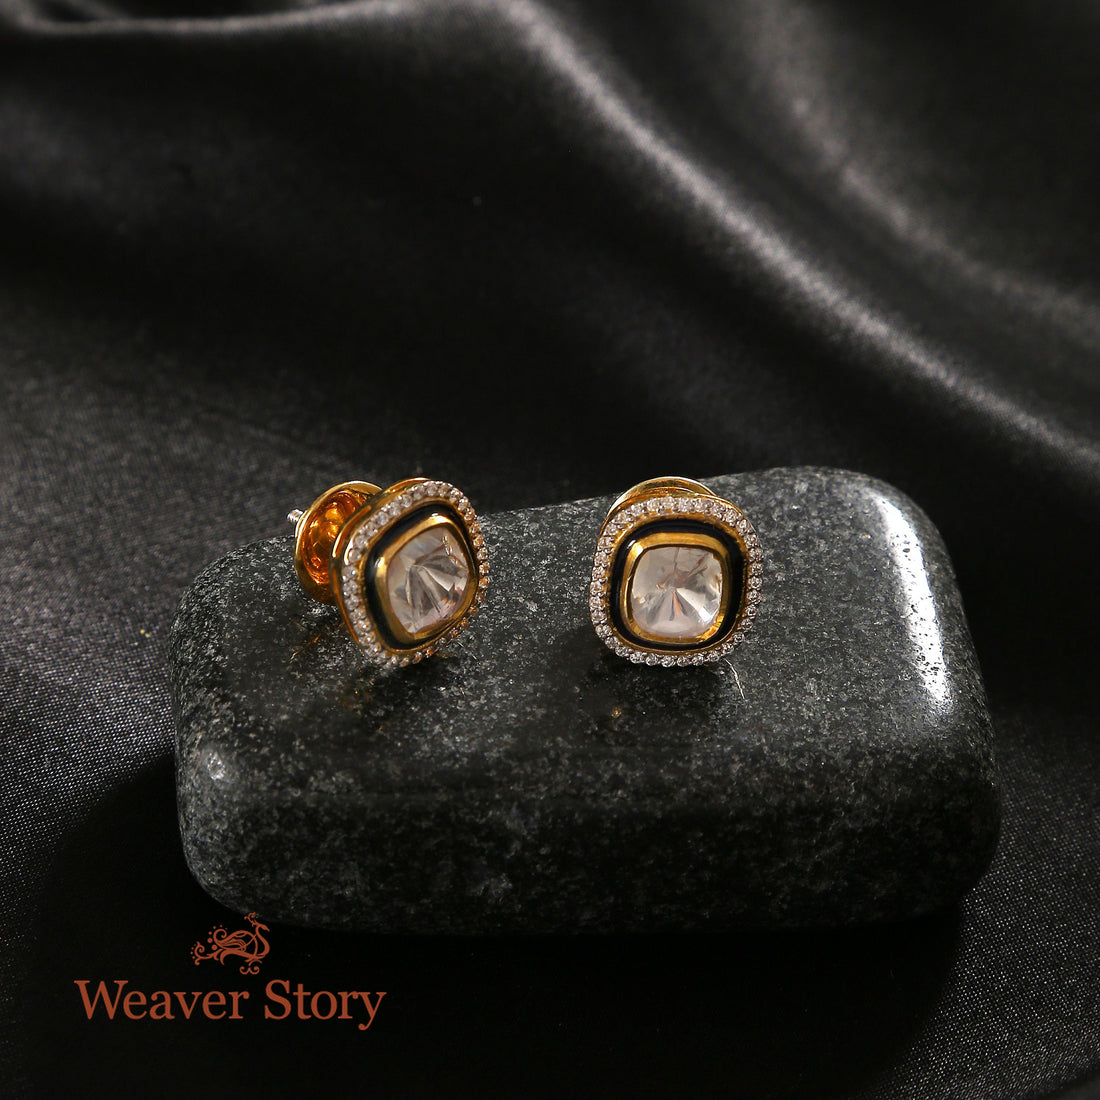 Seher_Earrings_with_Moissanite_Polki_Crafted_in_Pure_Silver_WeaverStory_01